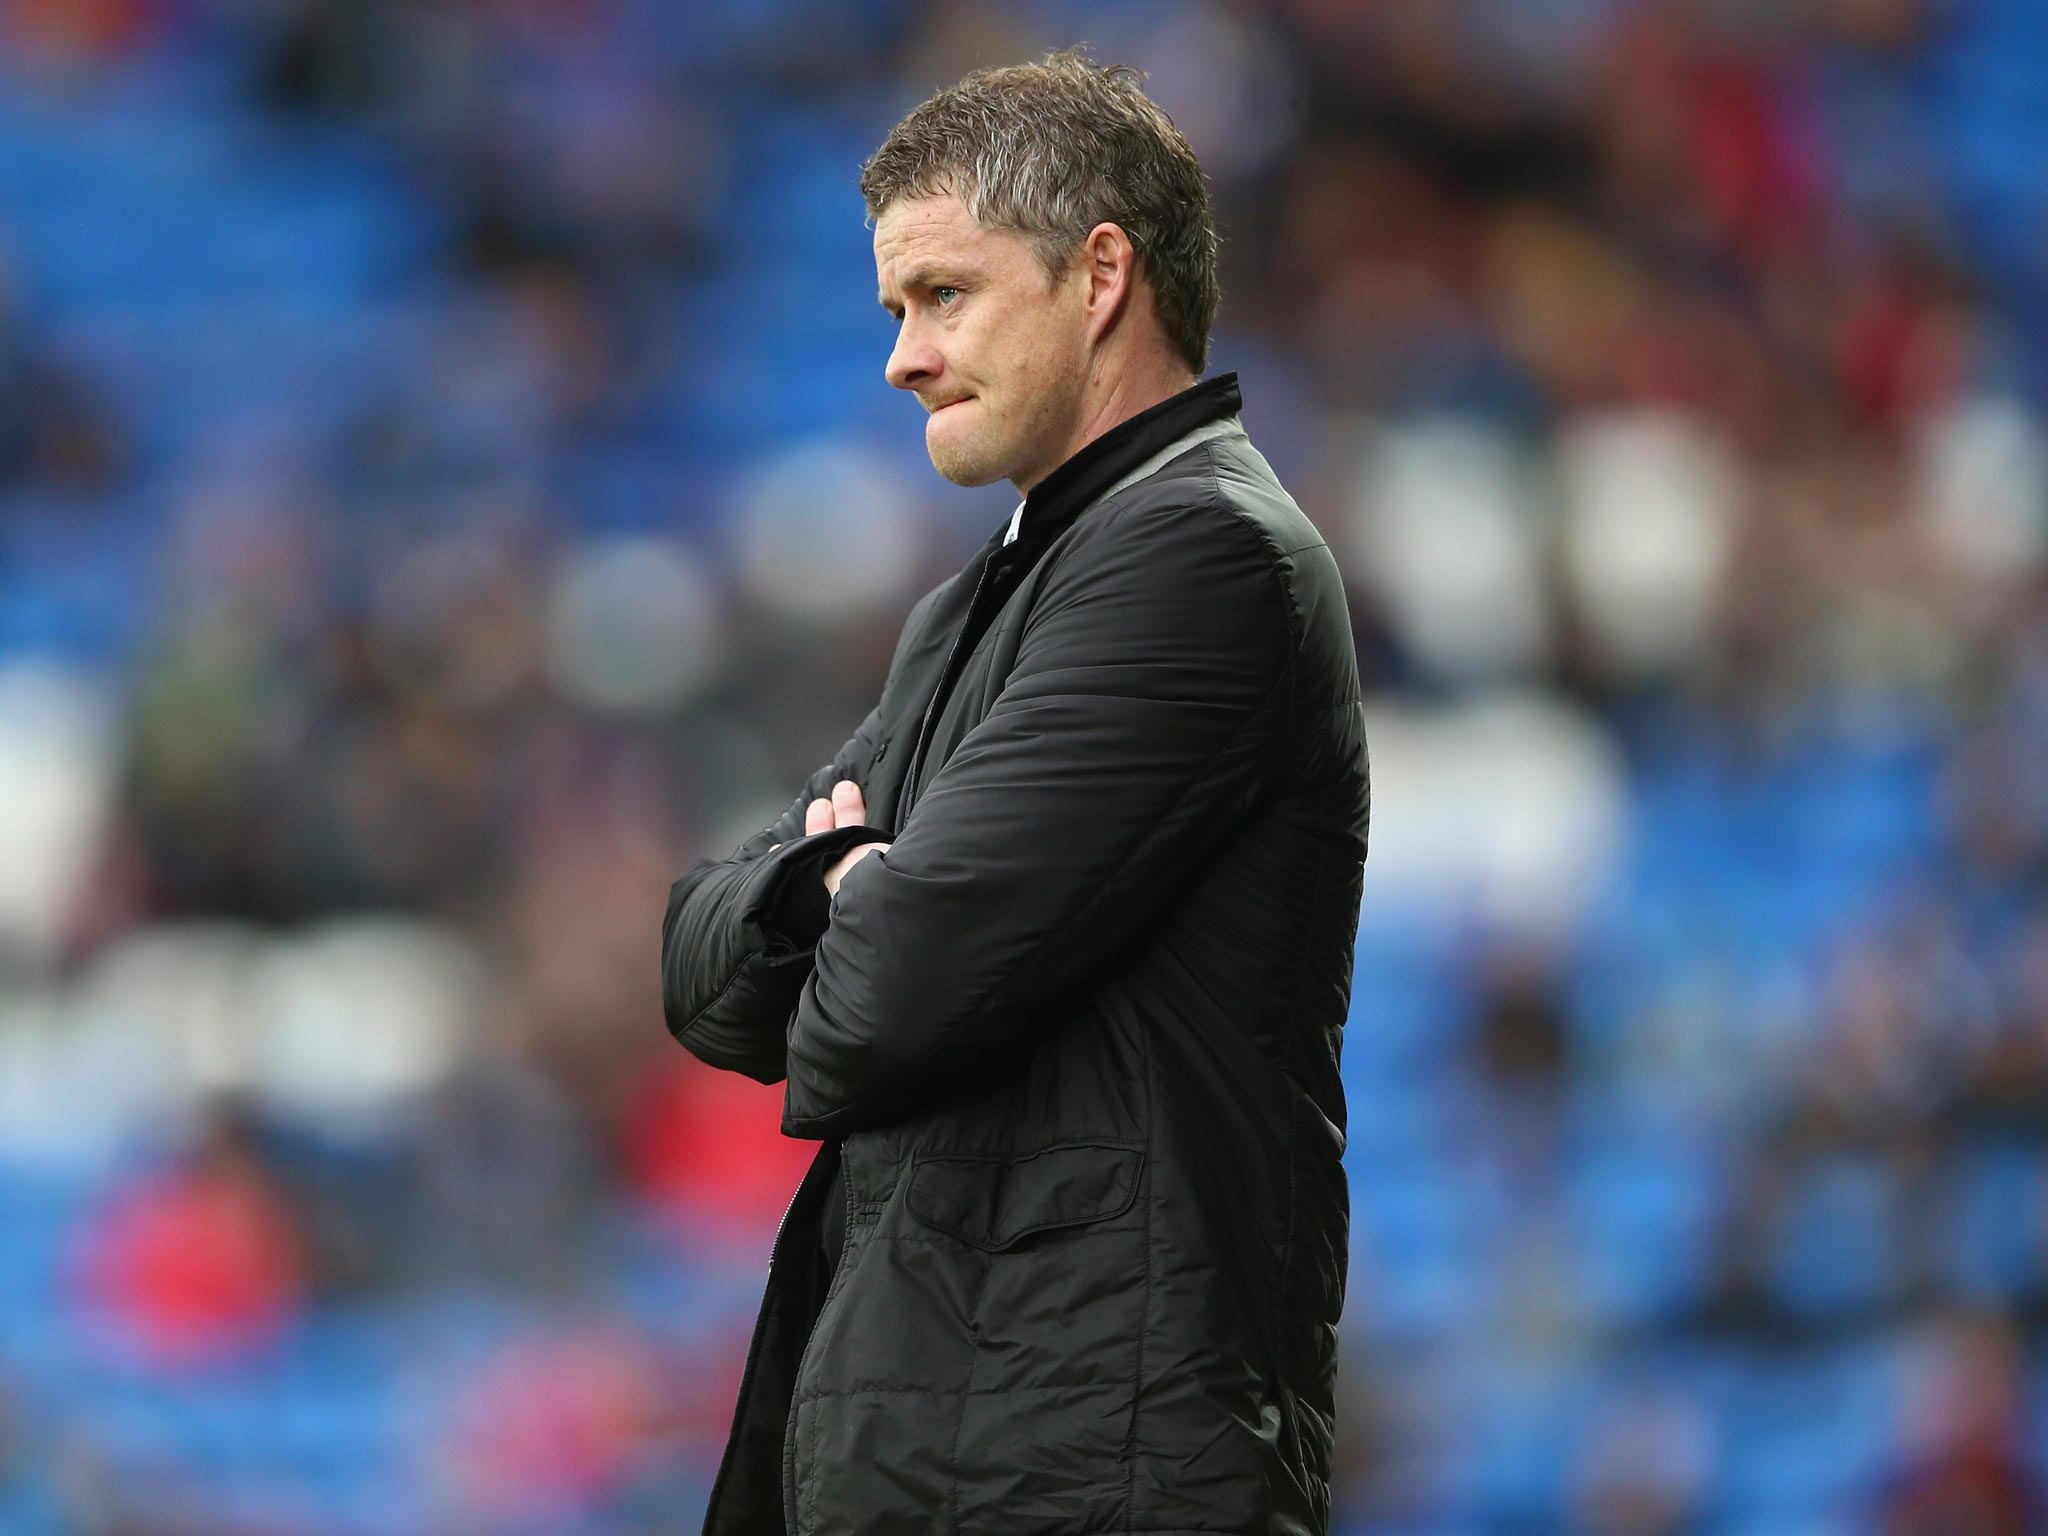 Cardiff manager Ole Gunnar Solskjaer has slowly developed a thousand-yard stare this season